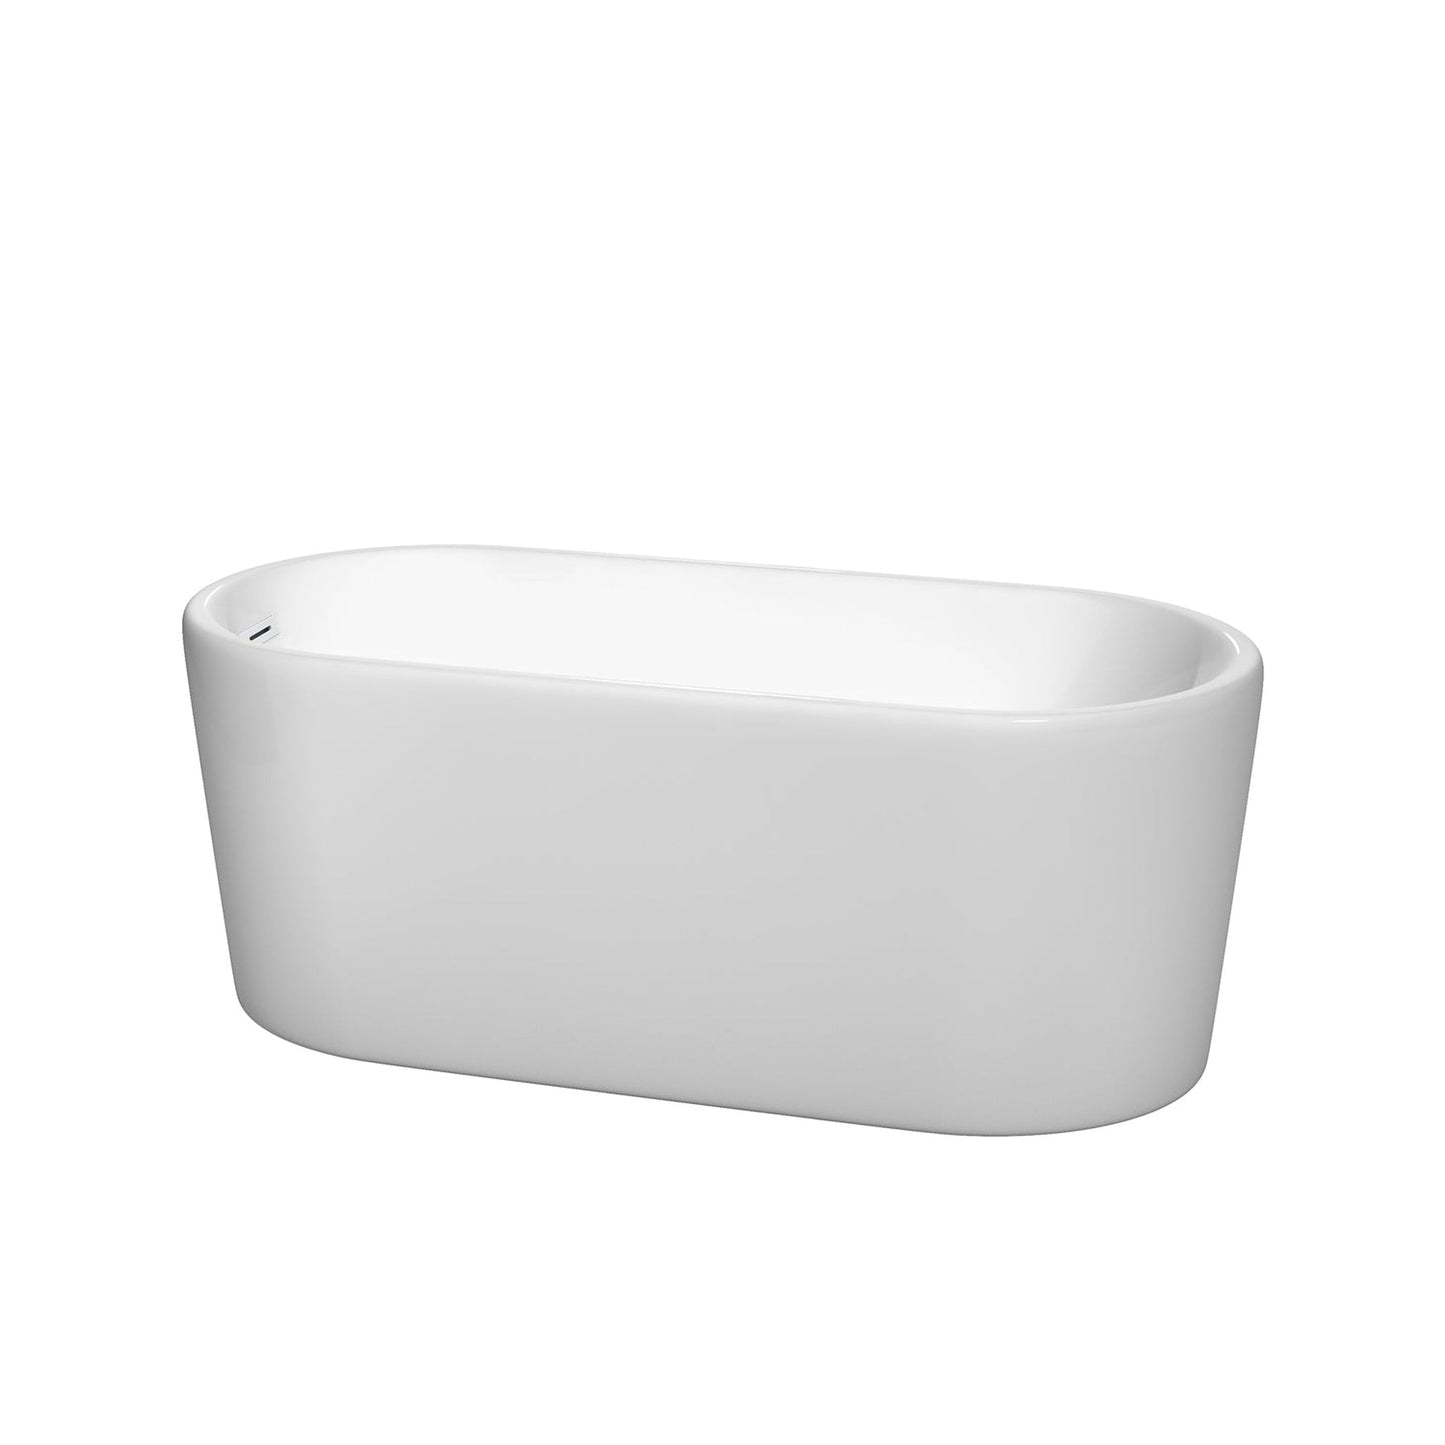 Wyndham Collection Ursula 59" Freestanding Bathtub in White With Shiny White Drain and Overflow Trim